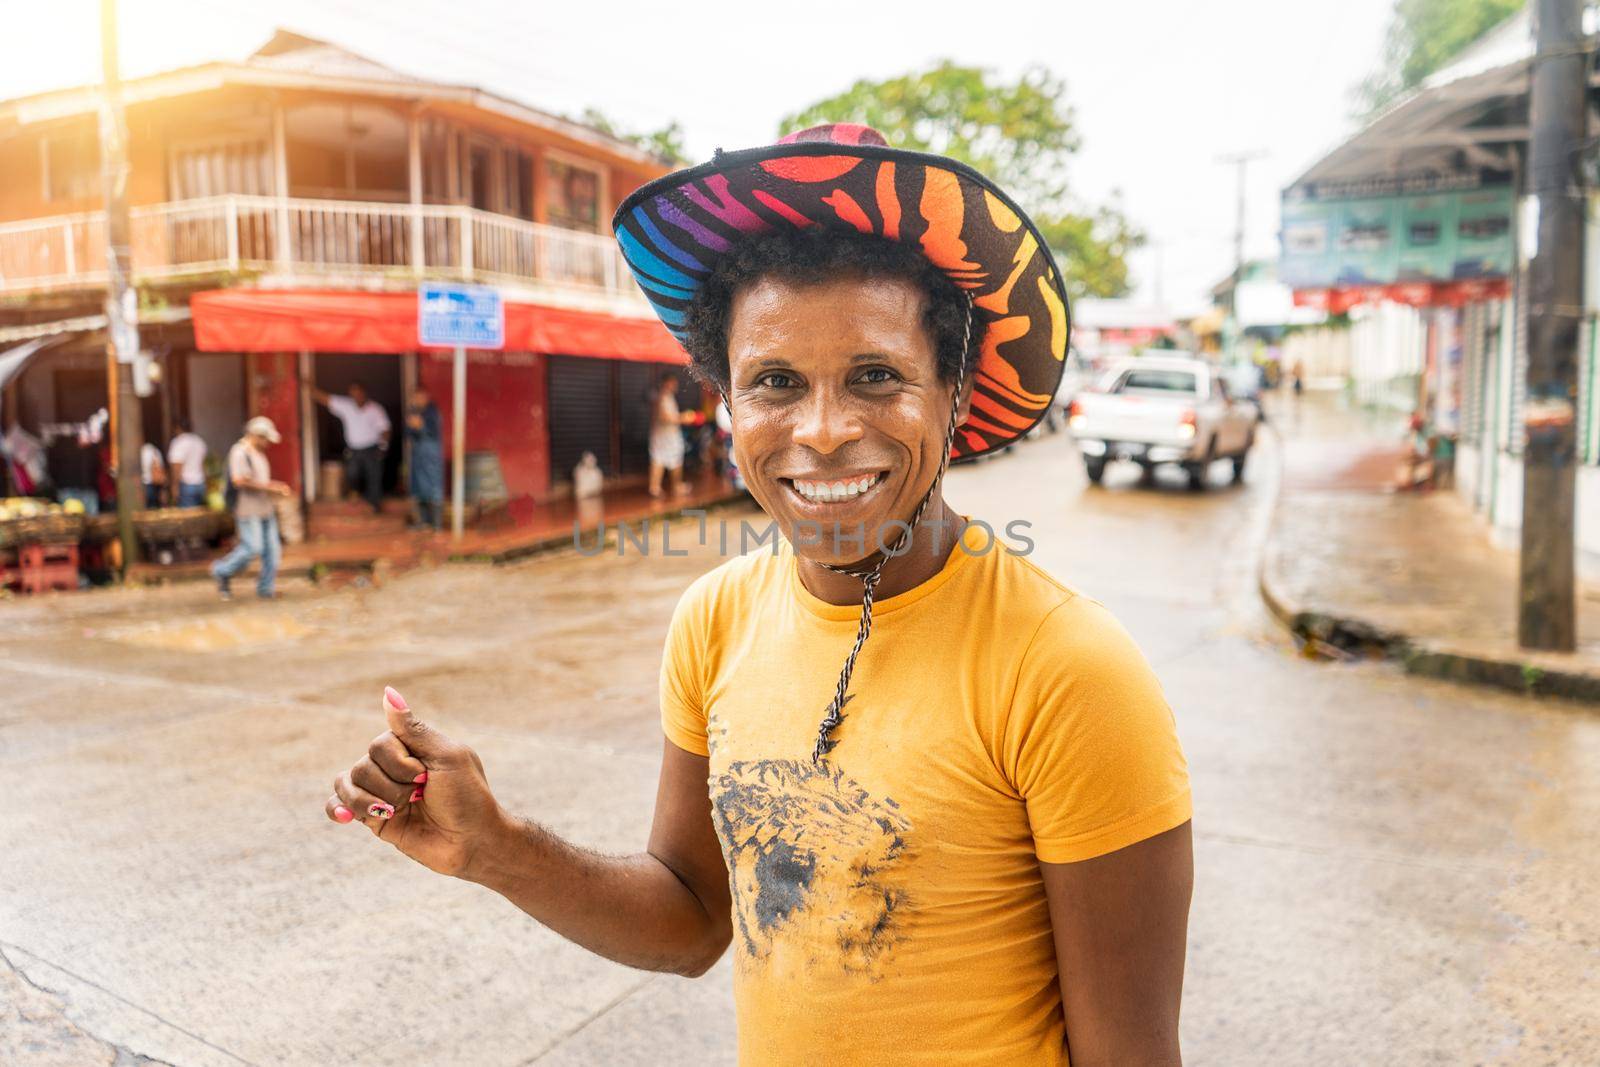 Black skinned latino gay with colorful hat smiling and looking at camera in Bluefields Nicaragua